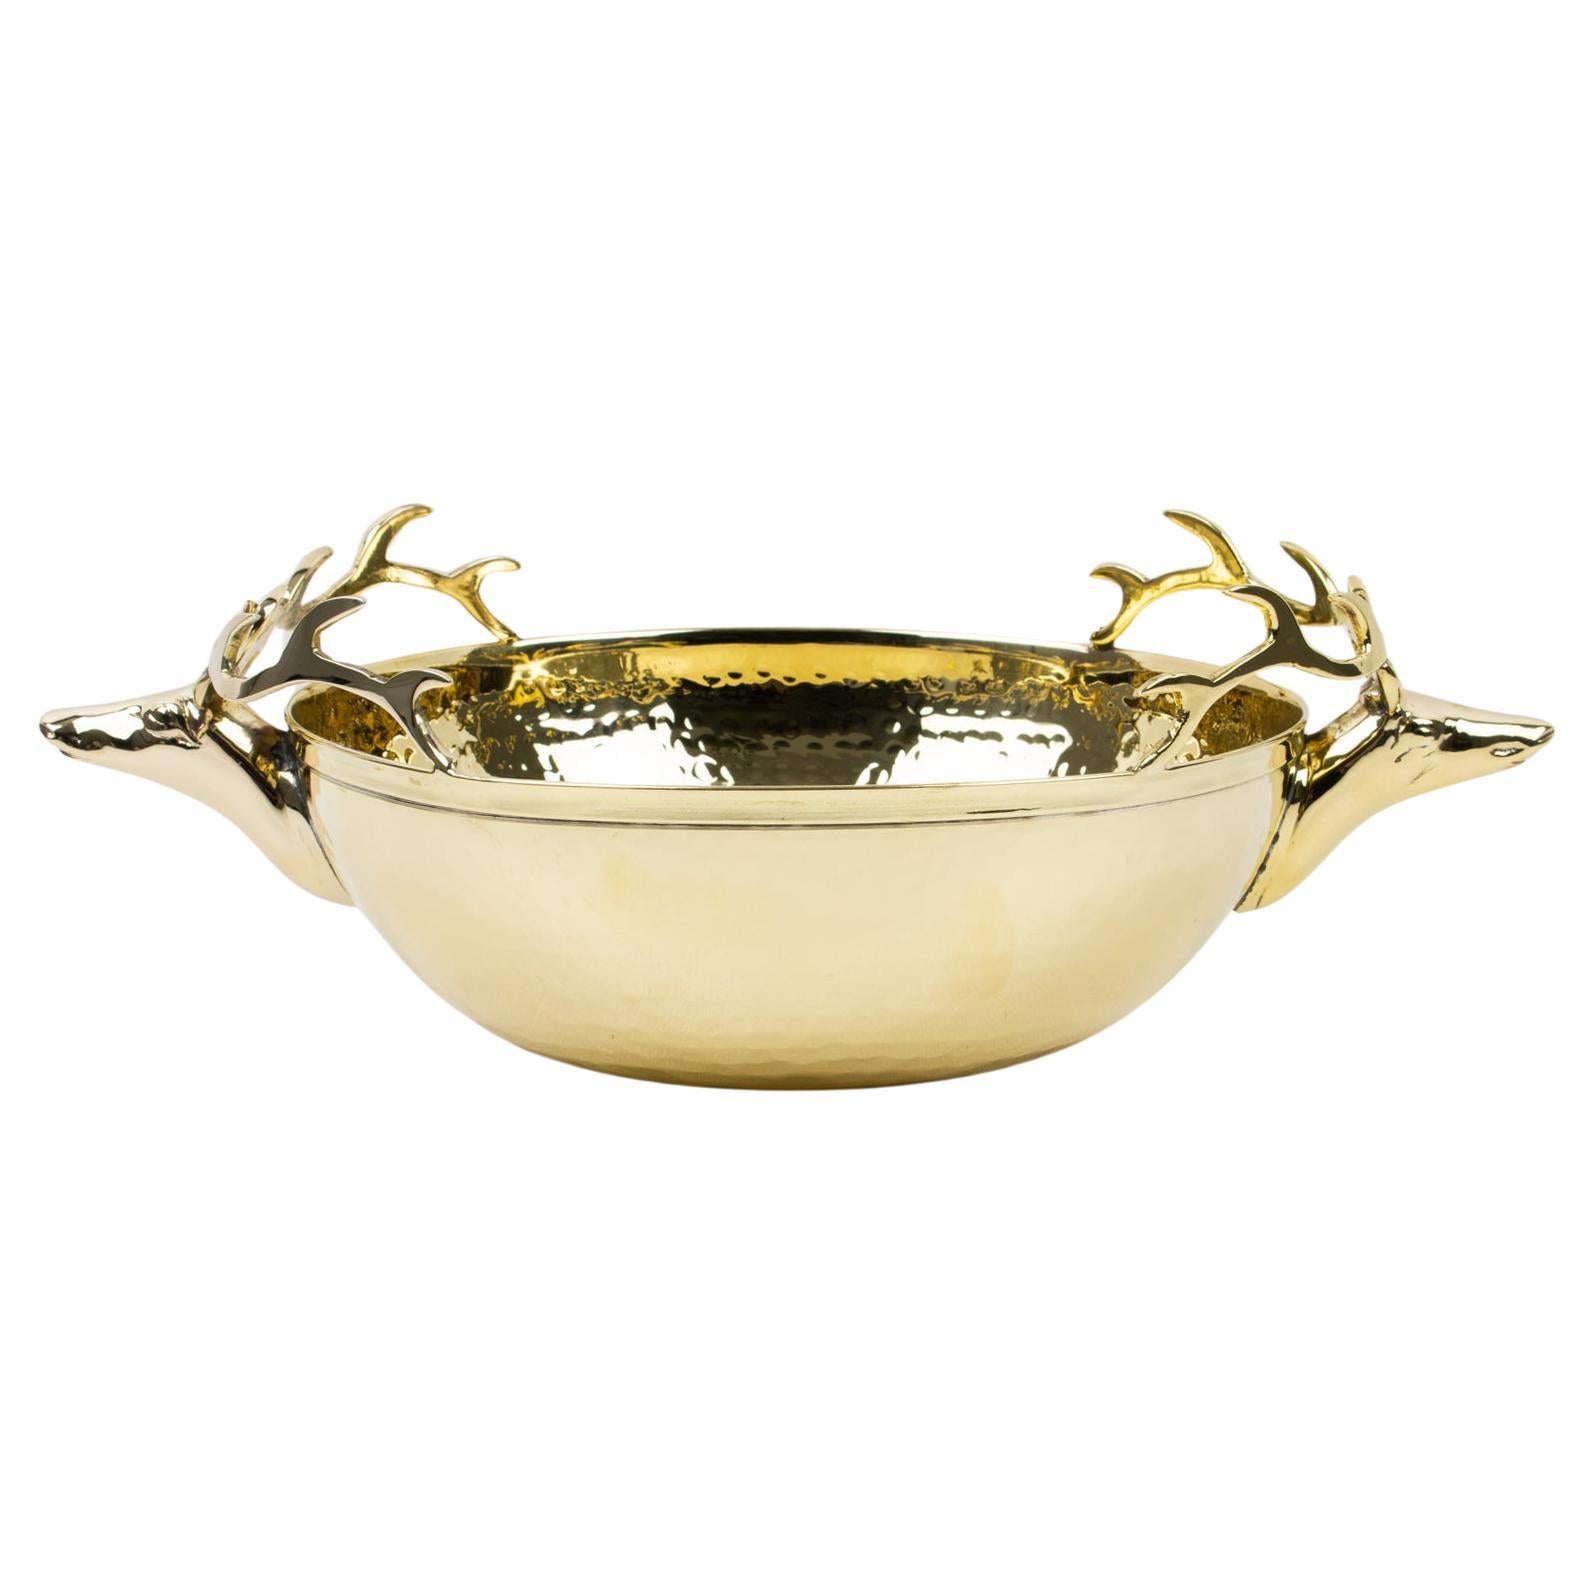 Brass Bowl Decorative Centerpiece with Stag Heads Handles, Italy 1980s For Sale